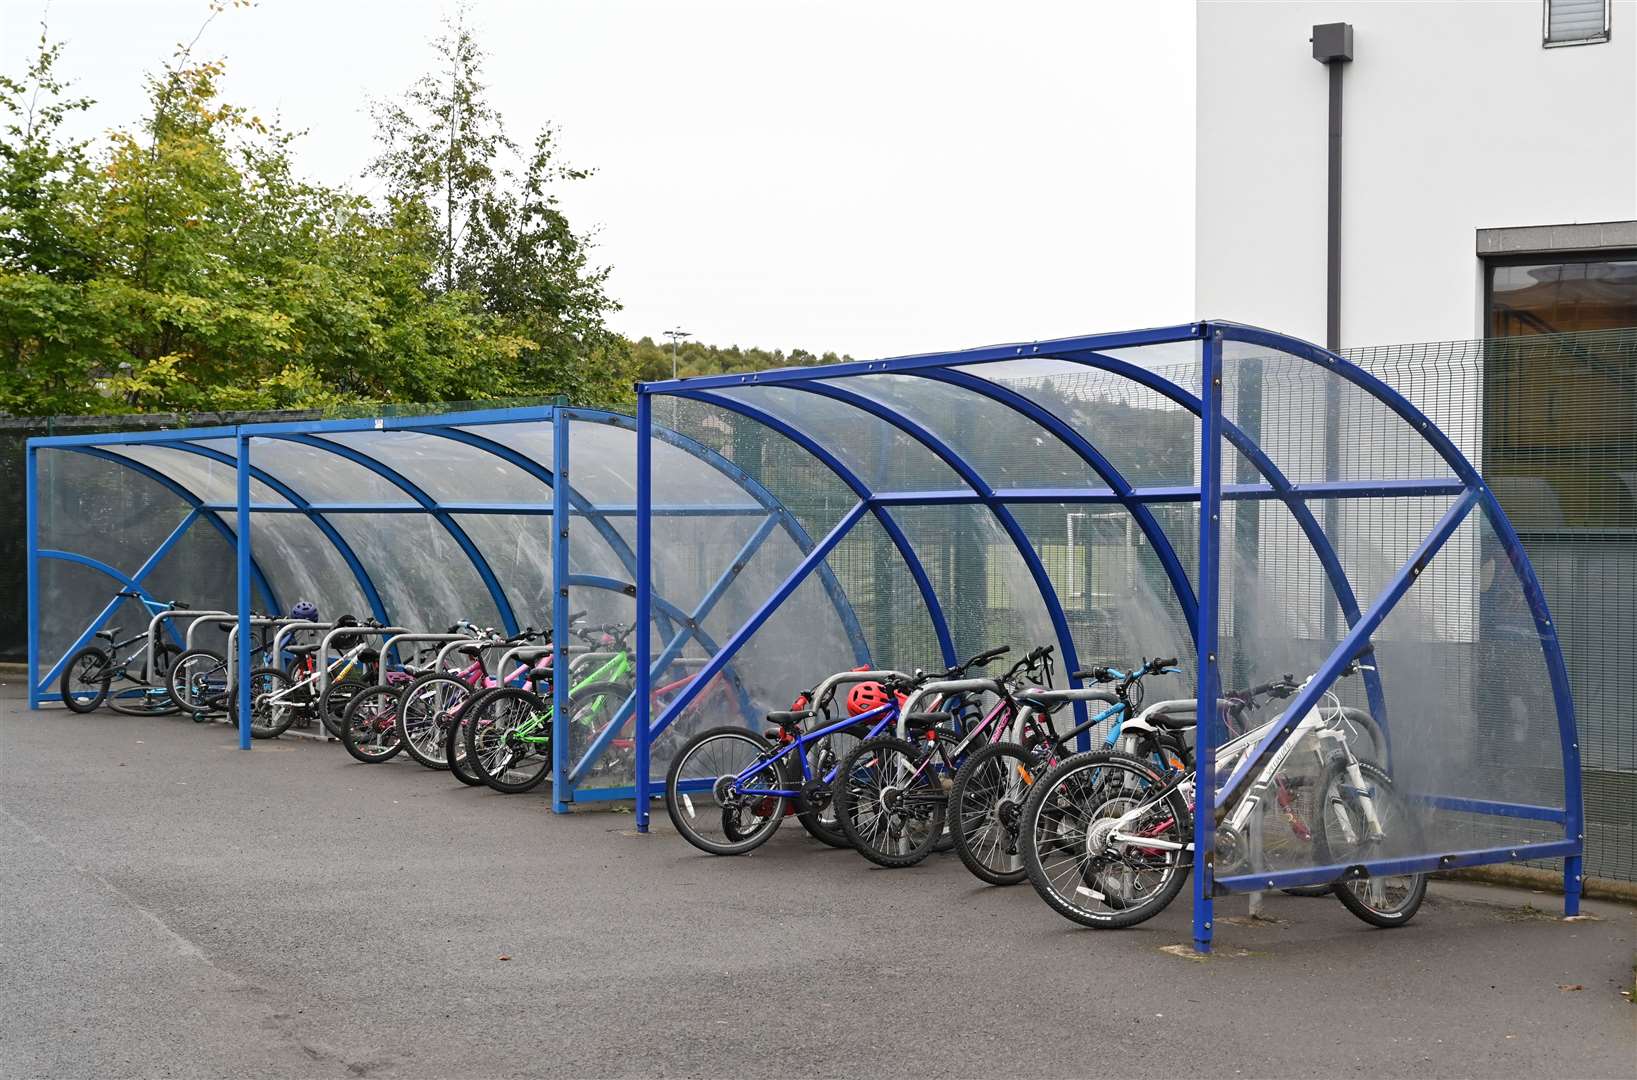 Bike shelters have been installed in primary schools across the region.